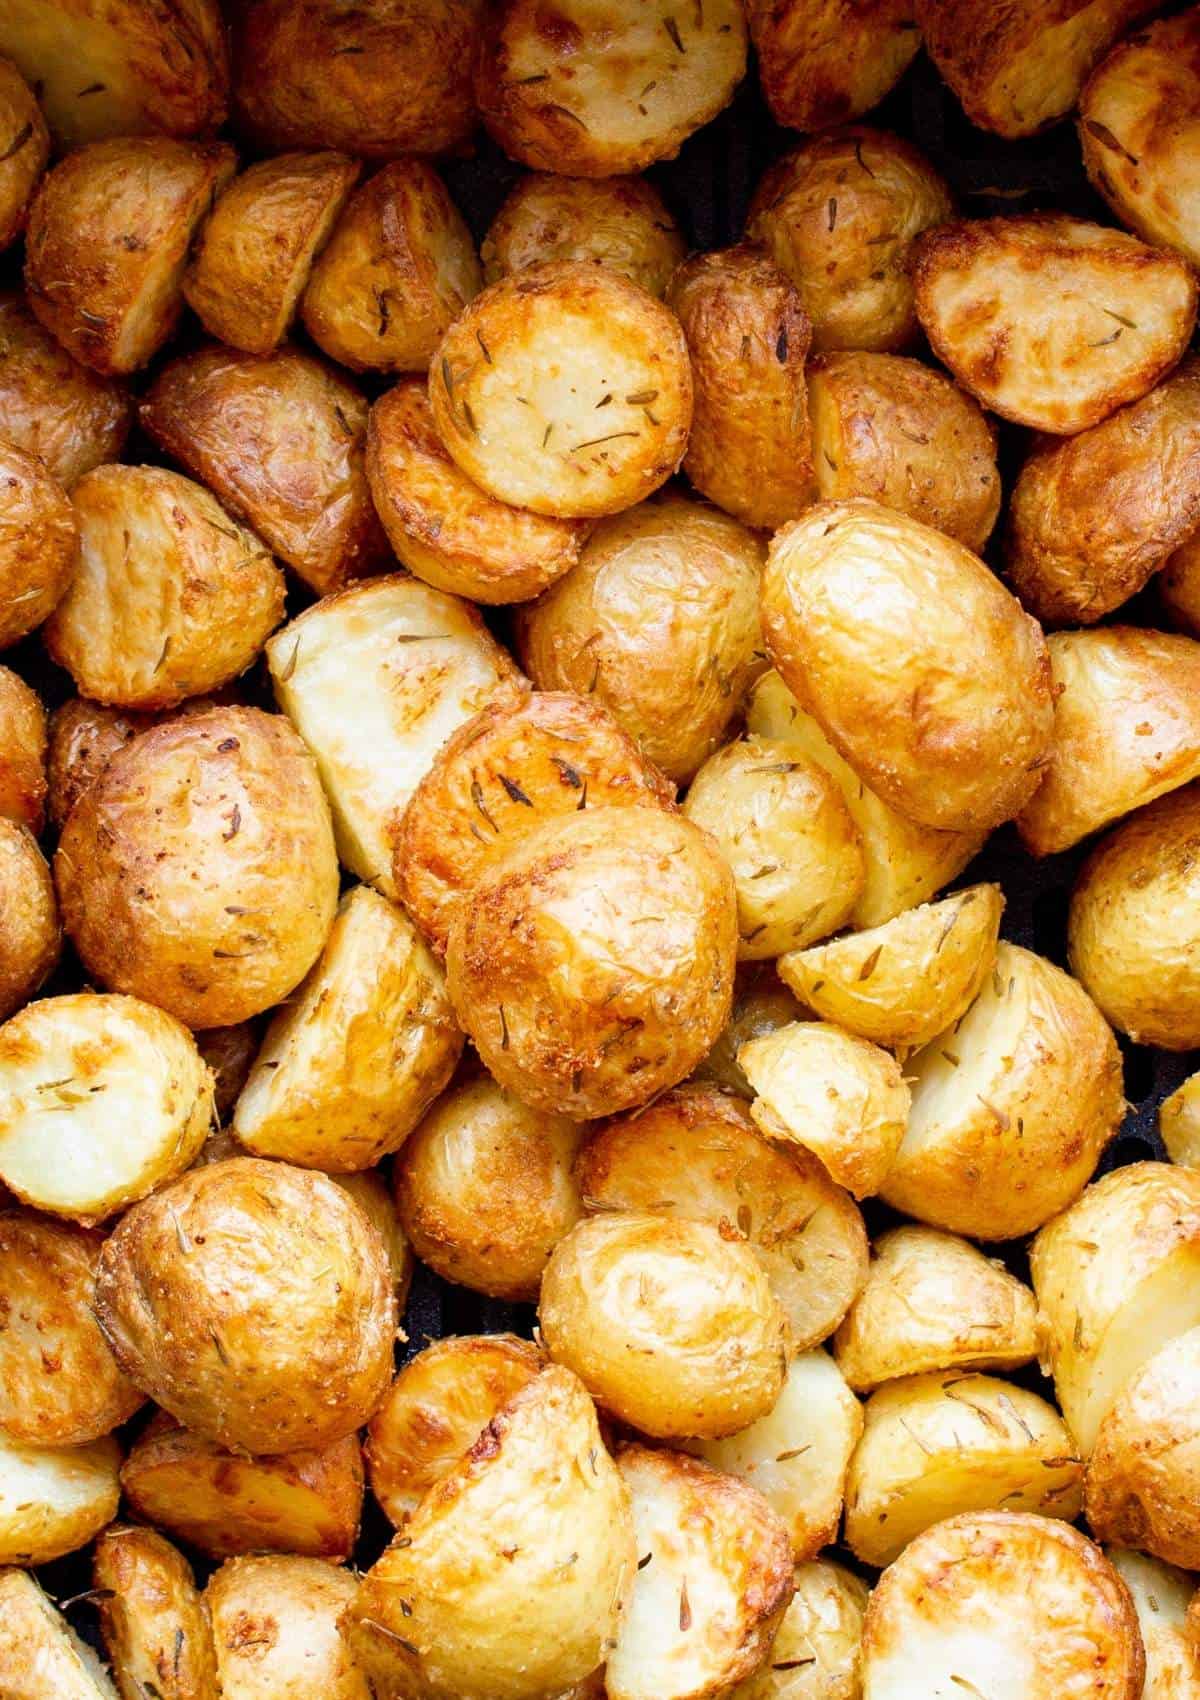 new potatoes baked in air fryer close up photo after cooking